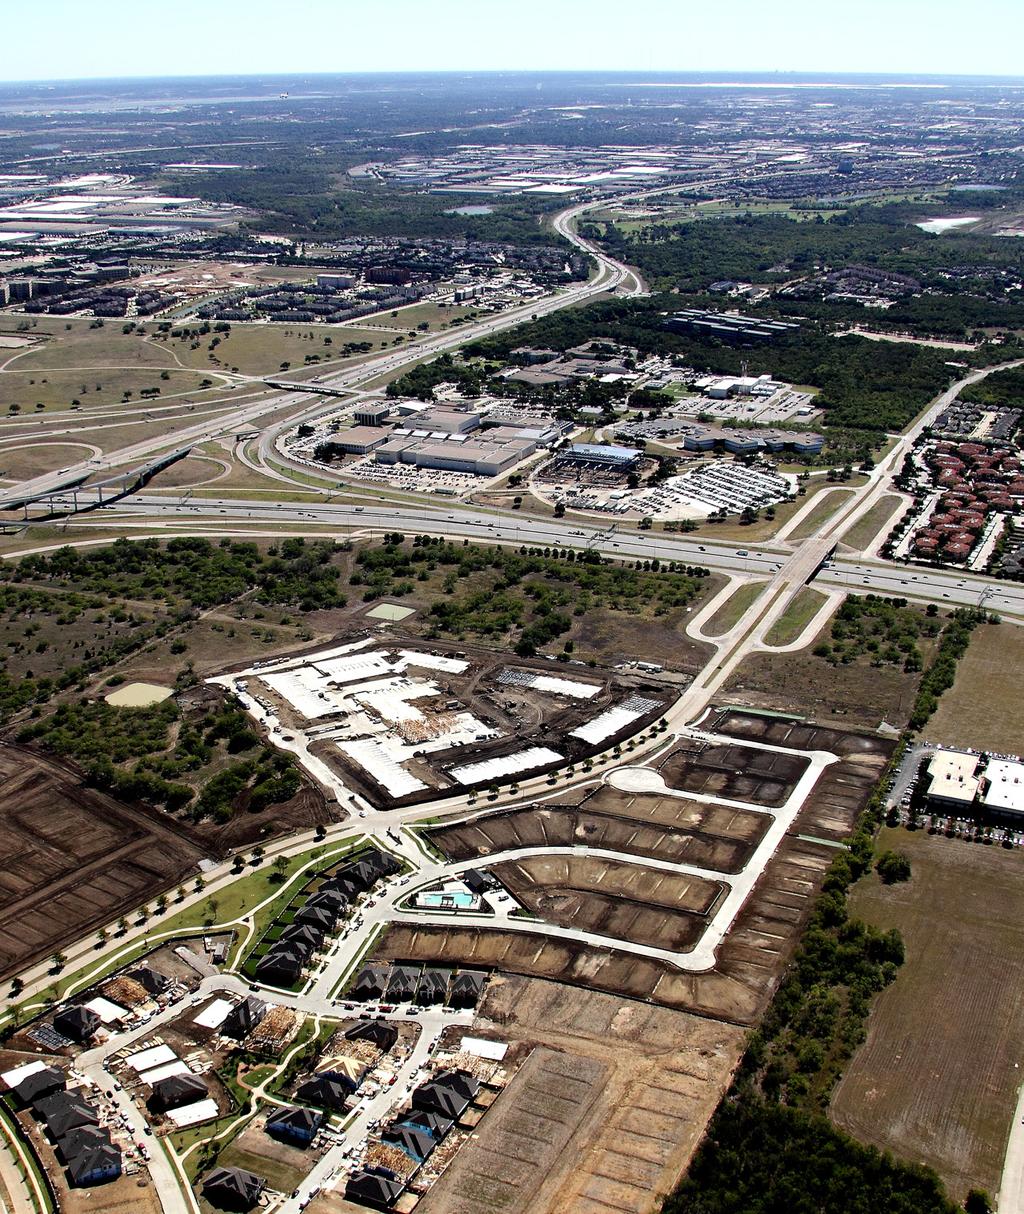 and Fort Worth. The southwestern portion of Dallas/Fort Worth International djacent to the site.